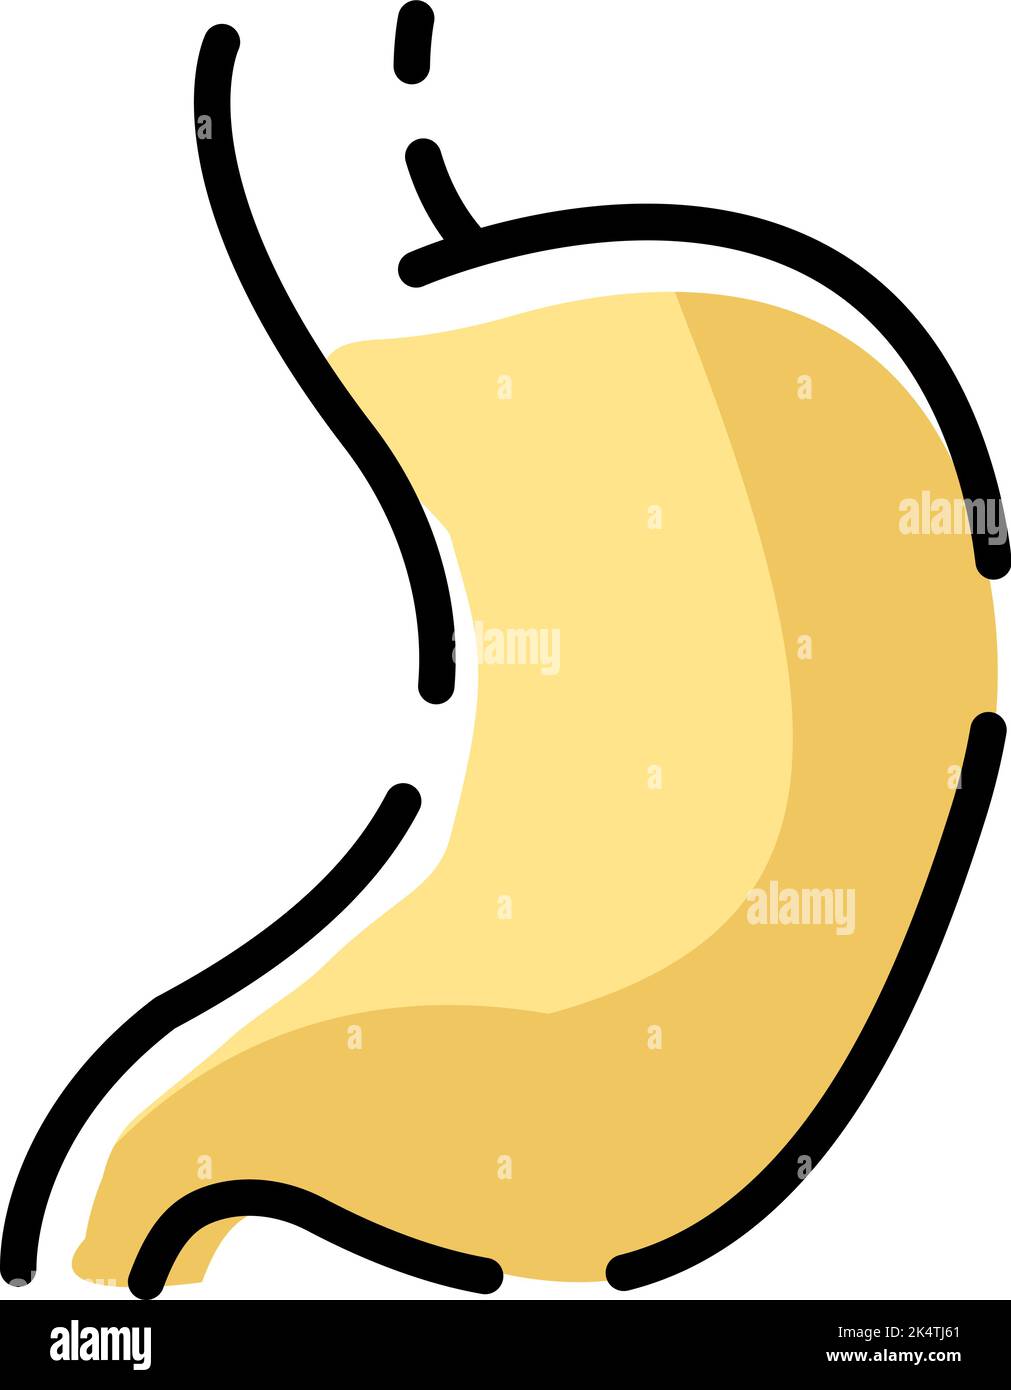 Human stomach, illustration, vector on a white background. Stock Vector